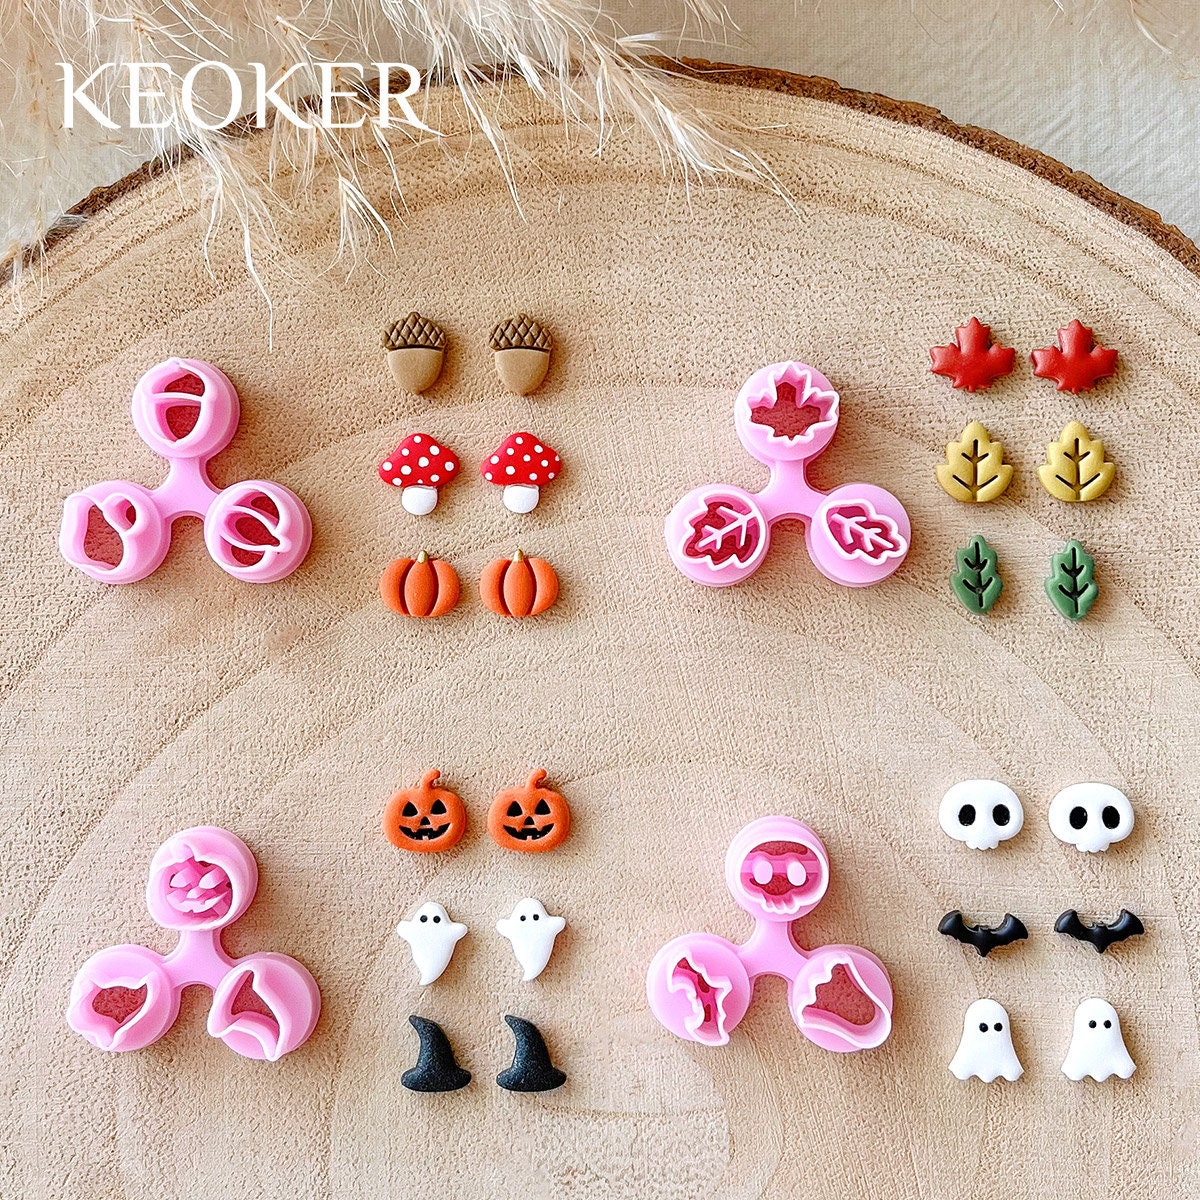 Keoker Fall Polymer Clay Cutters Maple Leaf Clay Cutters for